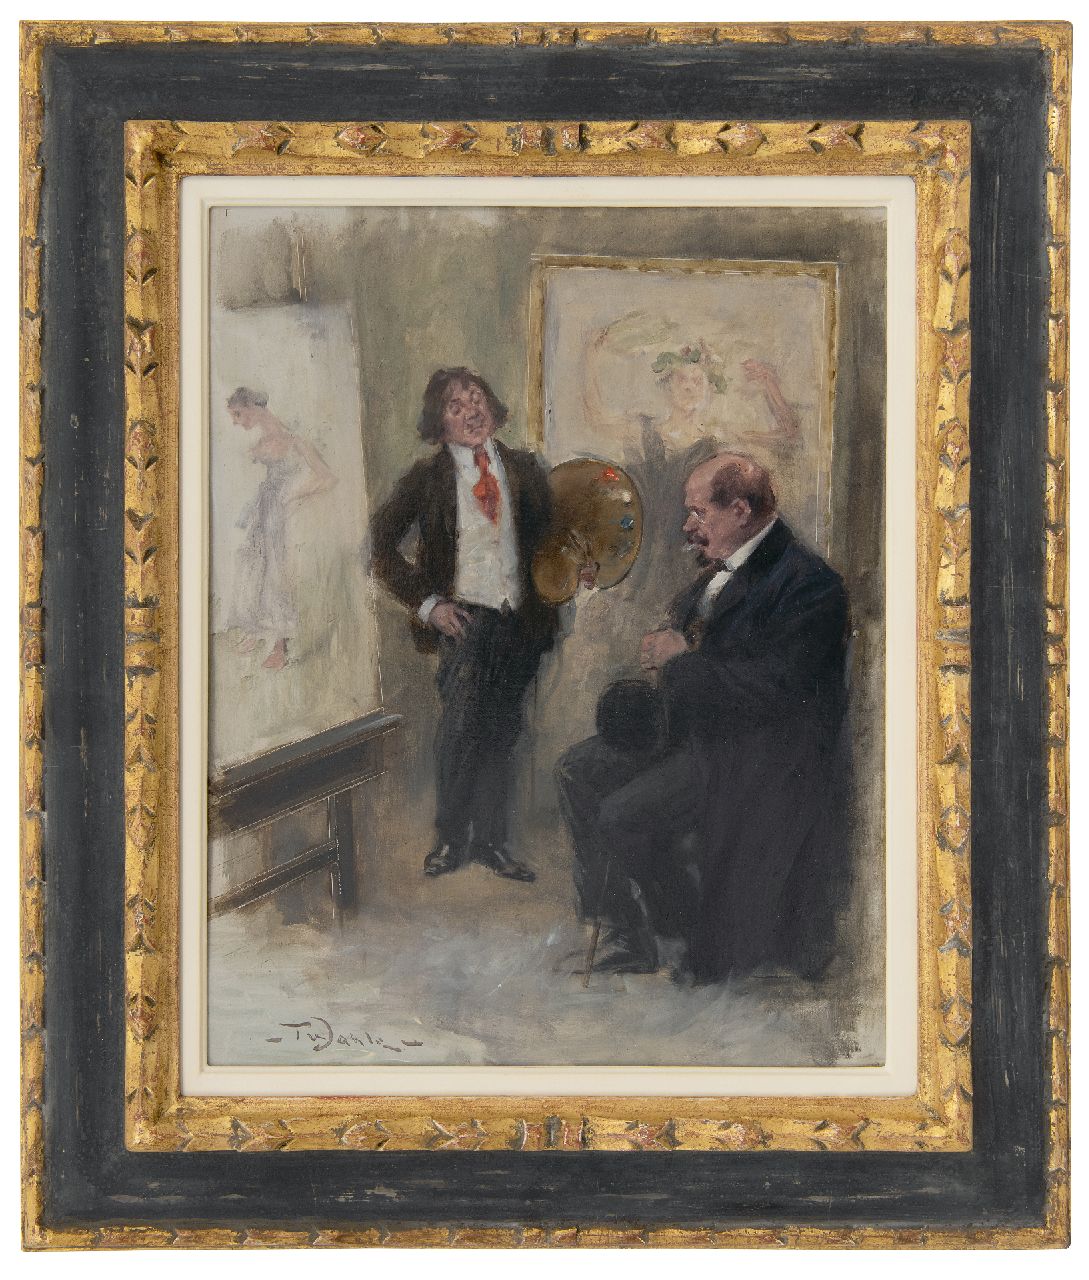 Wahle F.  | Friedrich 'Fritz' Wahle, The critical art buyer, oil on painter's board 38.4 x 30.6 cm, signed l.l.